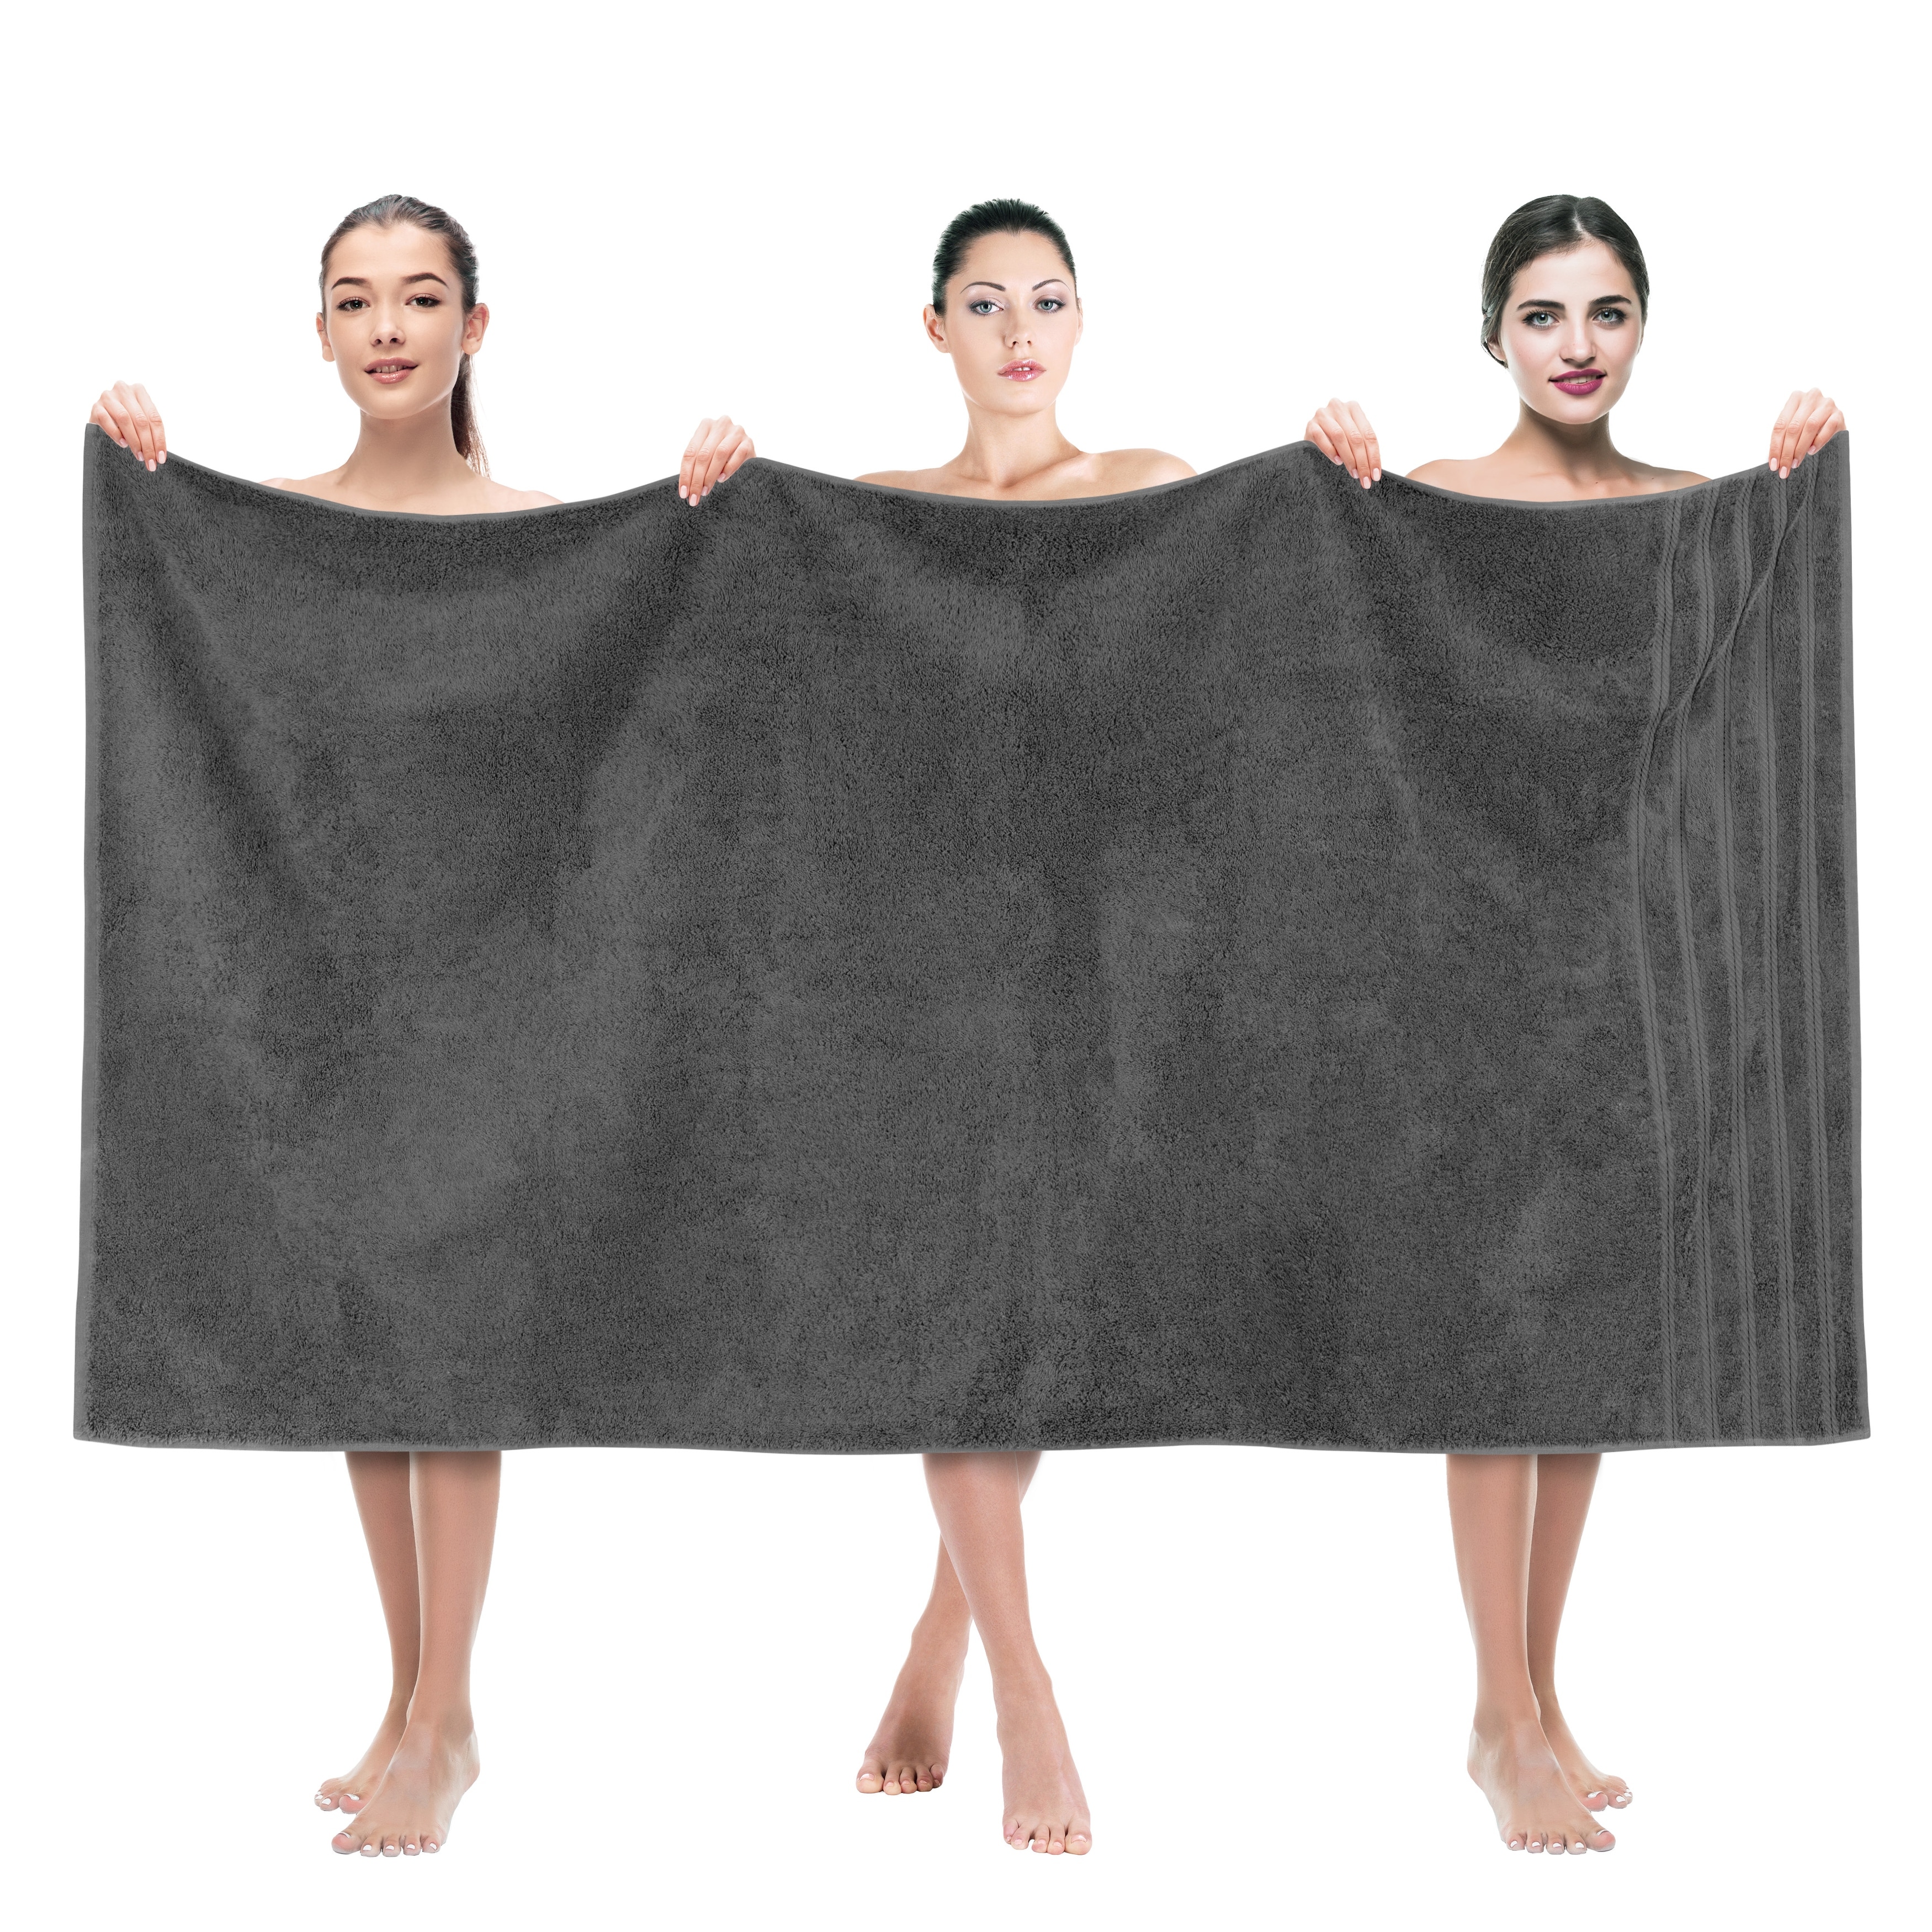 TEXTILOM 100% Turkish Cotton Oversized Luxury Bath Sheets, Jumbo & Extra Large Bath Towels Sheet for Bathroom and Shower with Maximum Softness & Absor